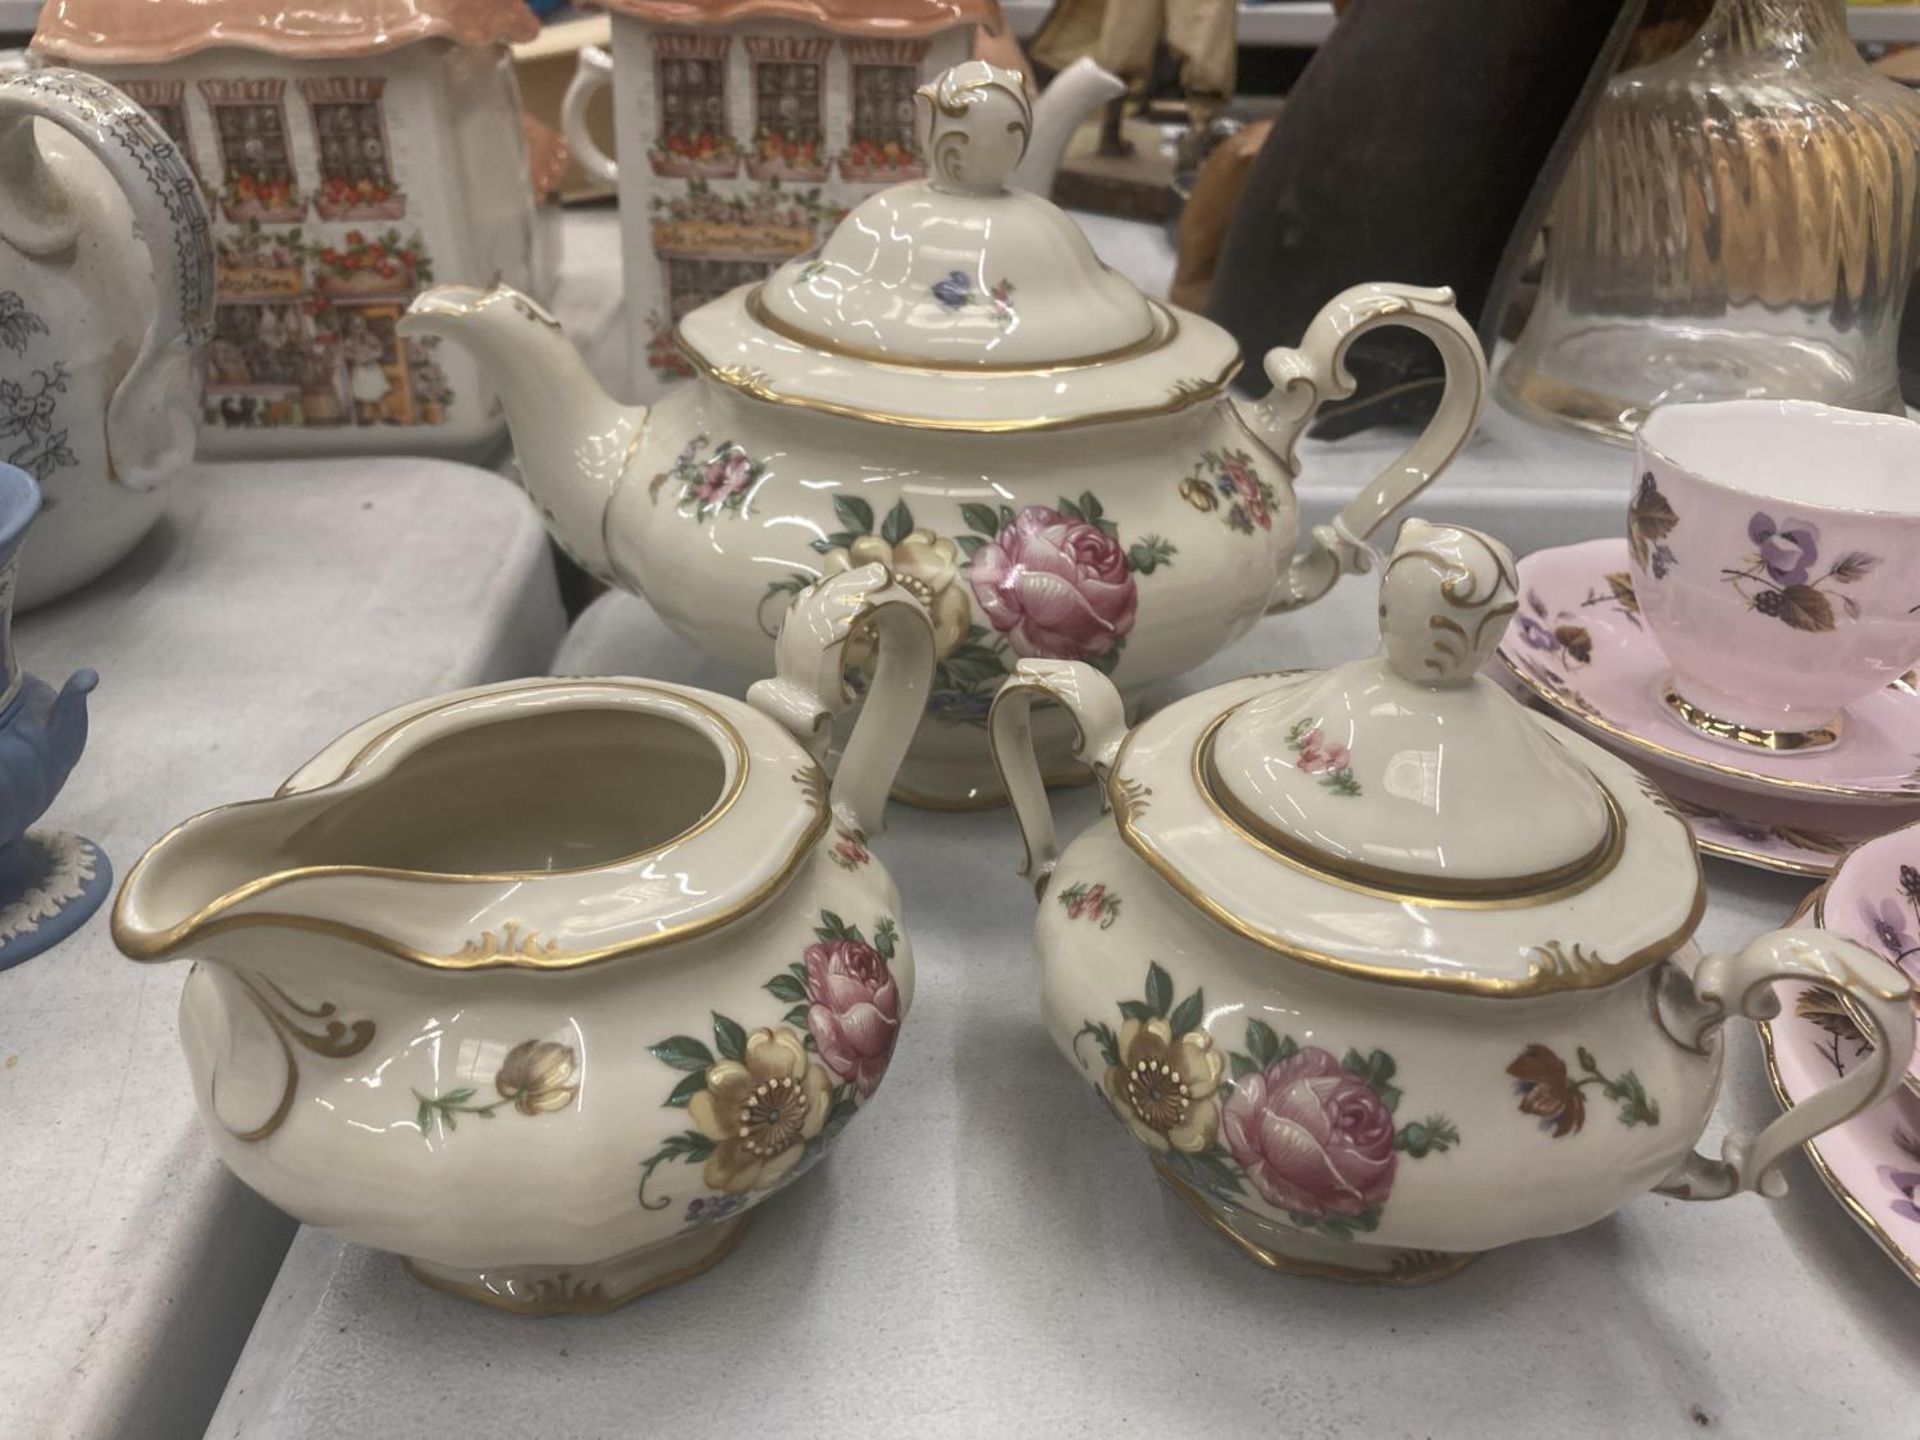 A PIRKEN HAMMER TEASET WITH A DELICATE FLORAL DESIGN WITH GILT RIMS TO INCLUDE A TEAPOT, CREAM - Image 4 of 5